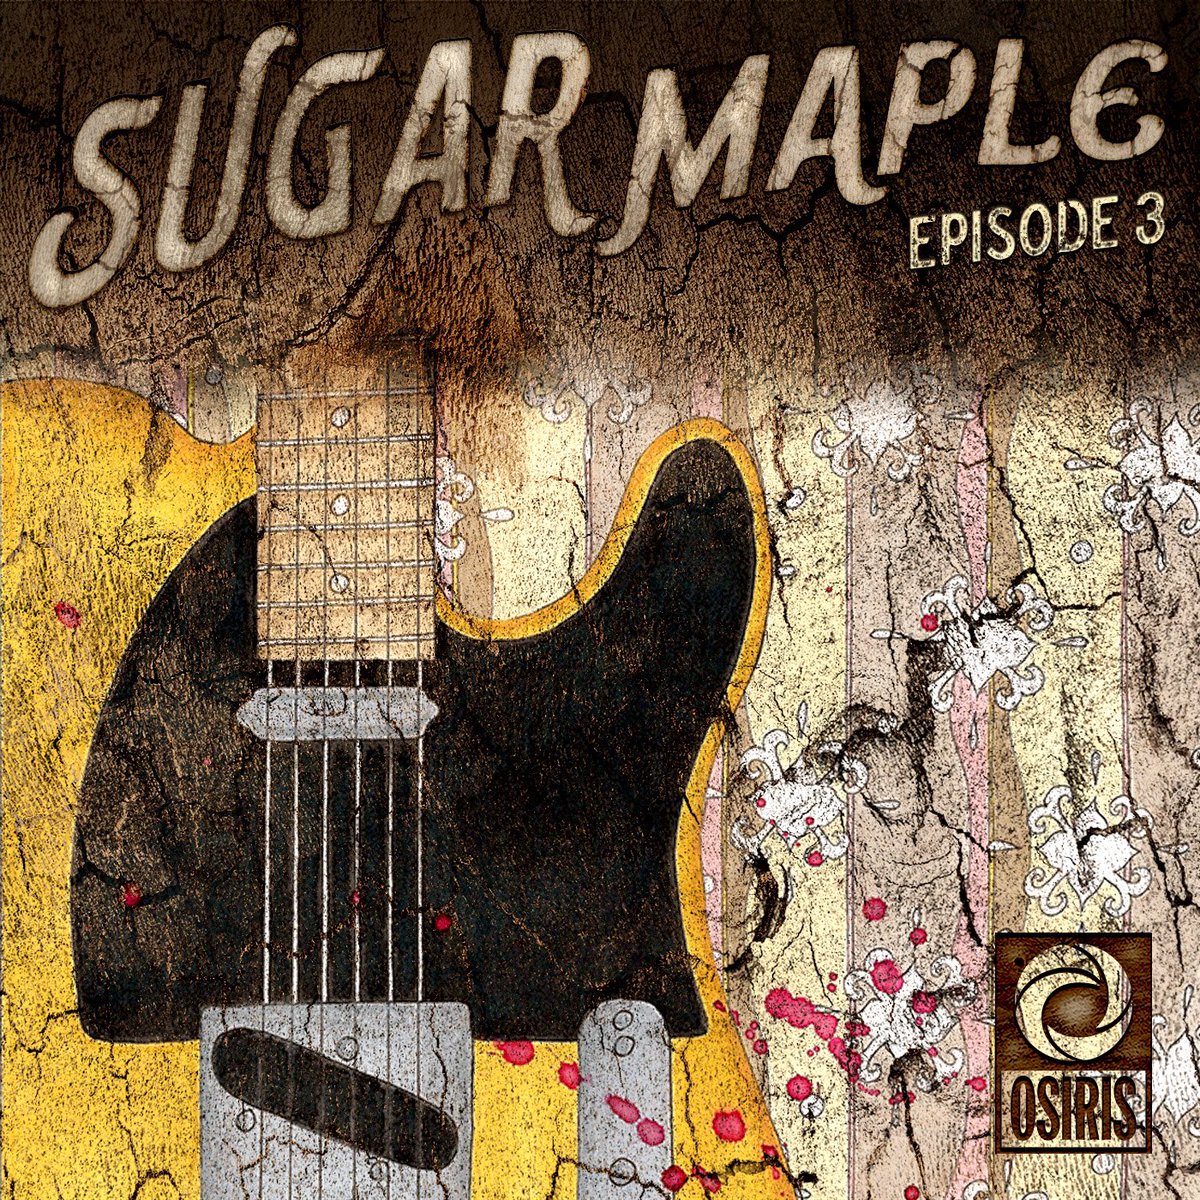 Let it bleed. #SugarMaple Ep3 takes us back to 1965 when disco legend Ornate Williams first got her big break after finding the fabled tele in a grisly scene. But newfound Motown fame threatens to expose a secret, one she may be willing to kill for. sugarmaplepod.com